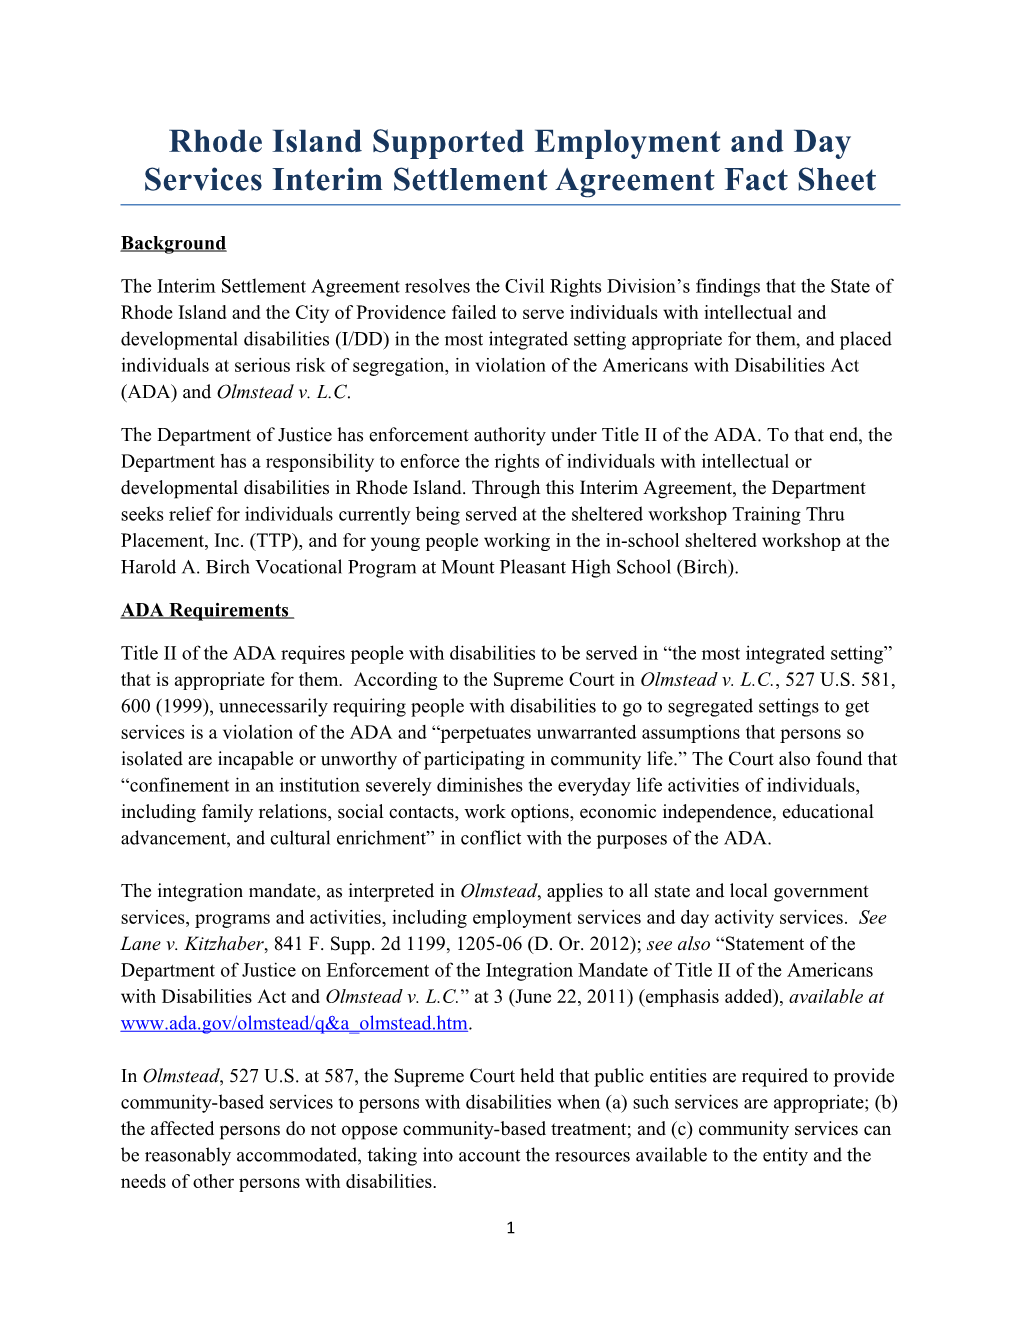 Rhode Island Supported Employment and Day Services Interim Settlement Agreement Fact Sheet